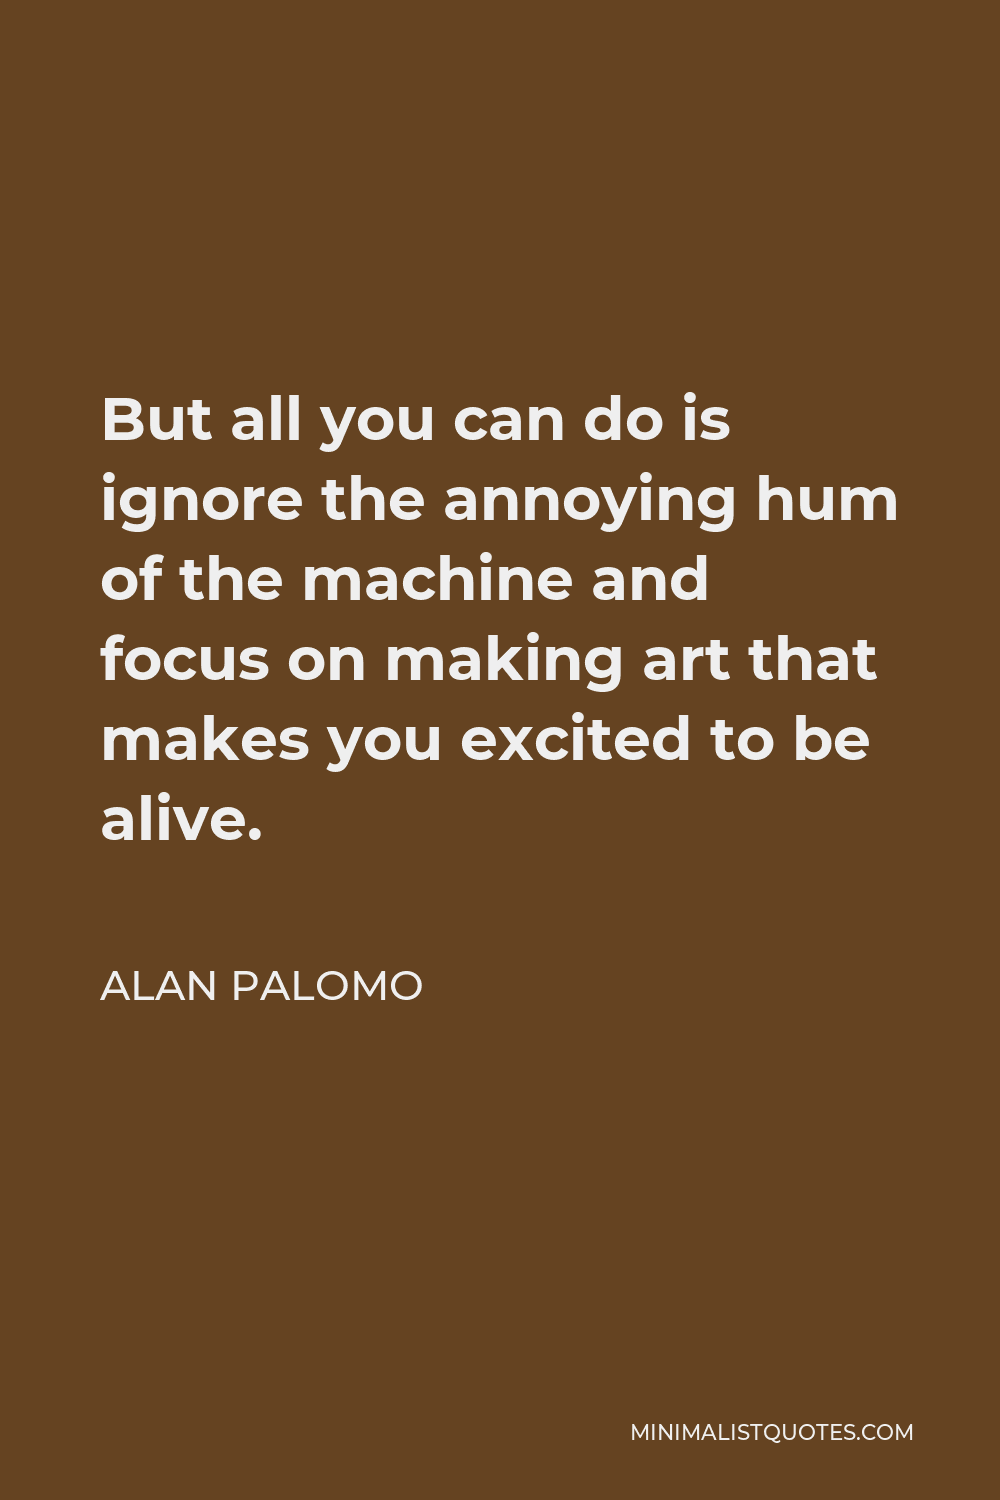 Alan Palomo Quote - But all you can do is ignore the annoying hum of the machine and focus on making art that makes you excited to be alive.